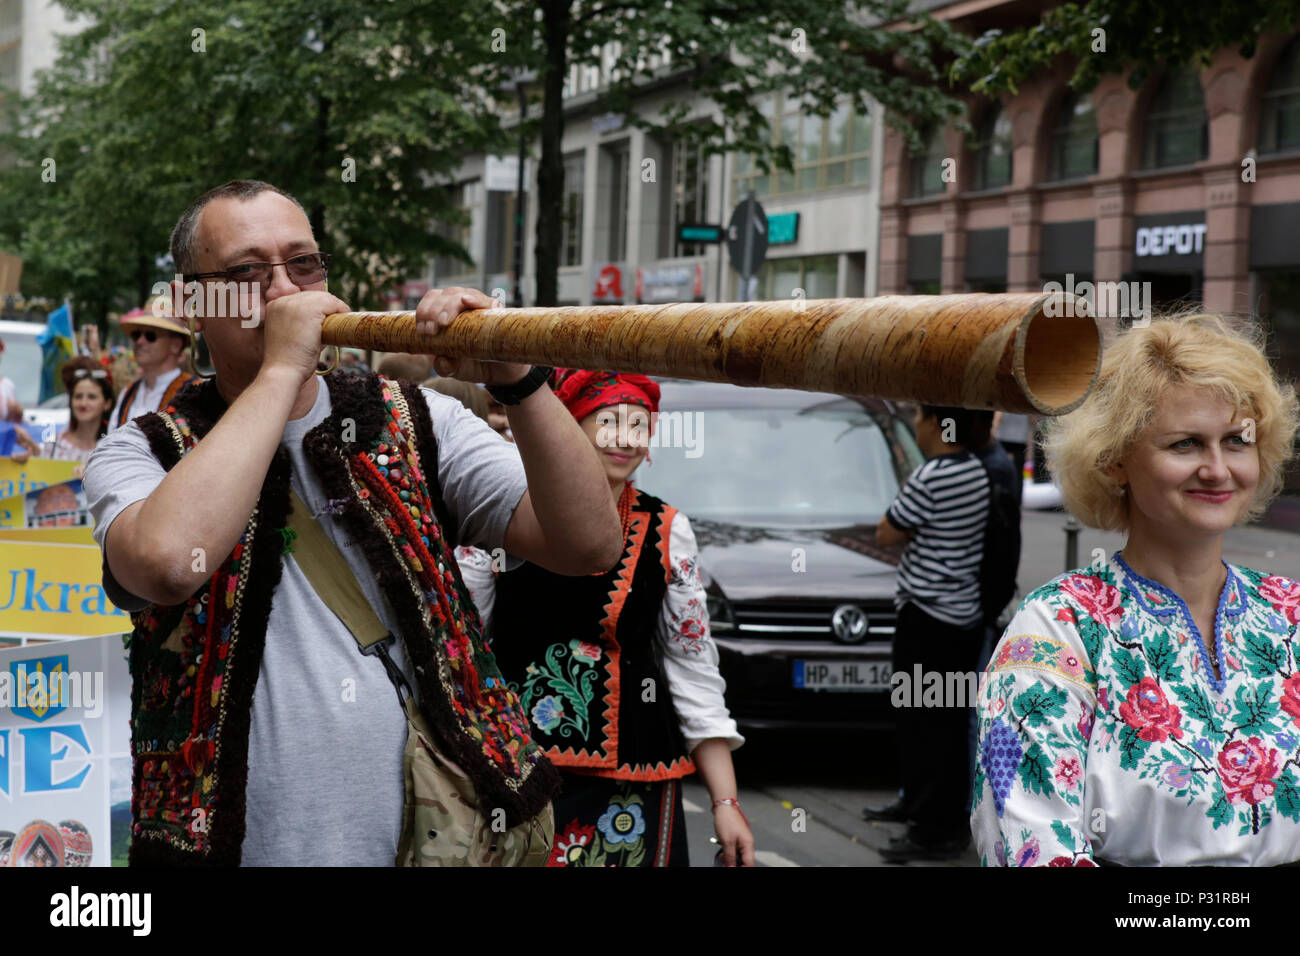 Frankfurt, Germany. 16th June, 2018. A Ukrainian man plays the trembita, an Ukrainian alpine horn. Thousands of people participated and watched the 2018 Parade der Kulturen (Parade of Cultures), organised by the Frankfurter Jugendring (Frankfurt Youth Council). The parade with participants from over 40 different groups of expat and cultural organisations showcased the cultural diversity of Frankfurt. Credit: Michael Debets/Pacific Press/Alamy Live News Stock Photo